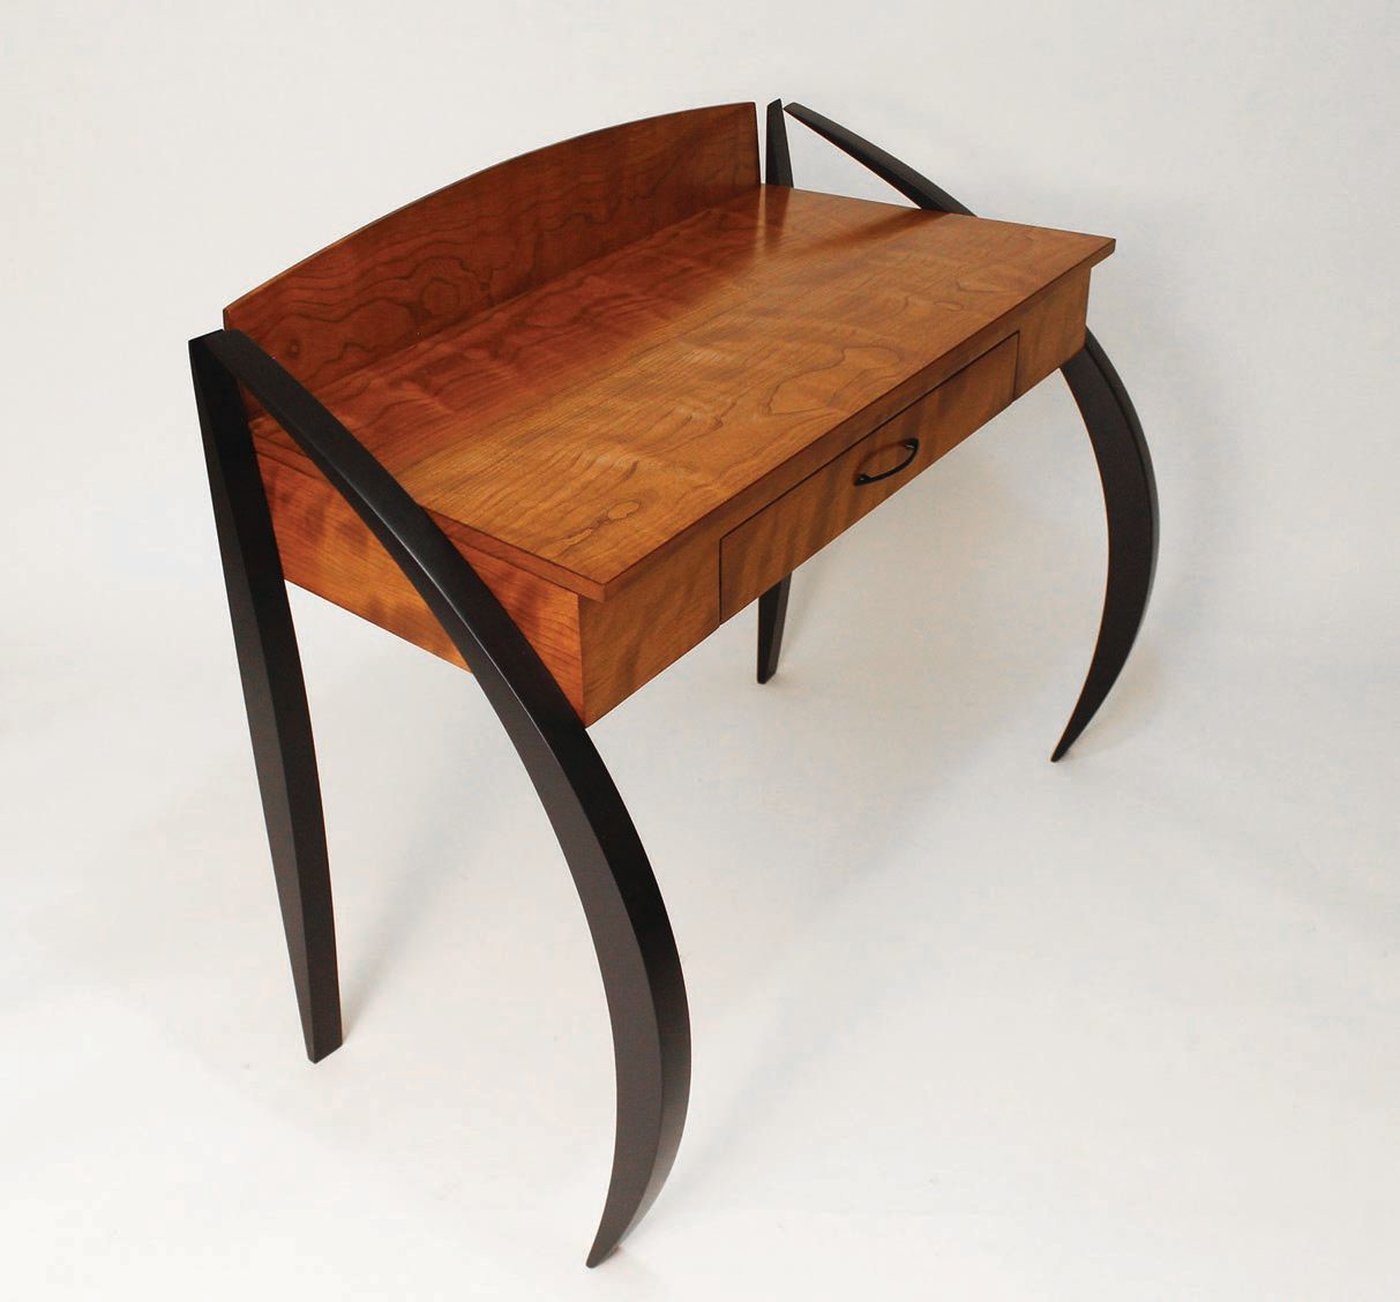 Norma Rose writing desk in curly cherry PHOTO BY PAUL CARLINO